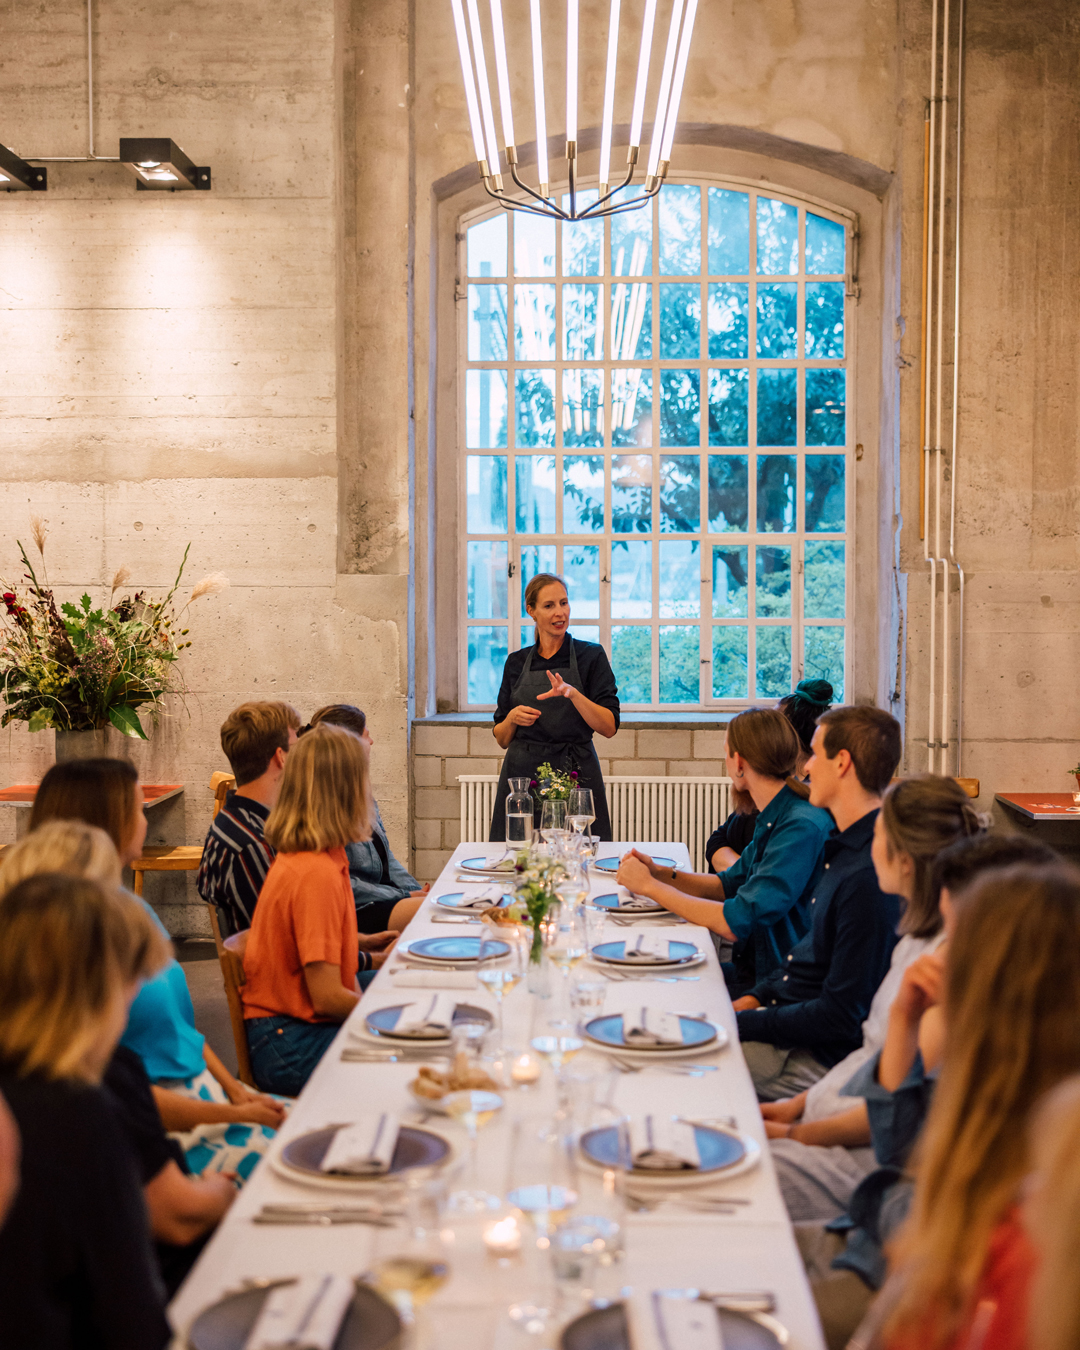 Tavolata at Kornsilo with guests at the table and Mirjam Eberle as hostess